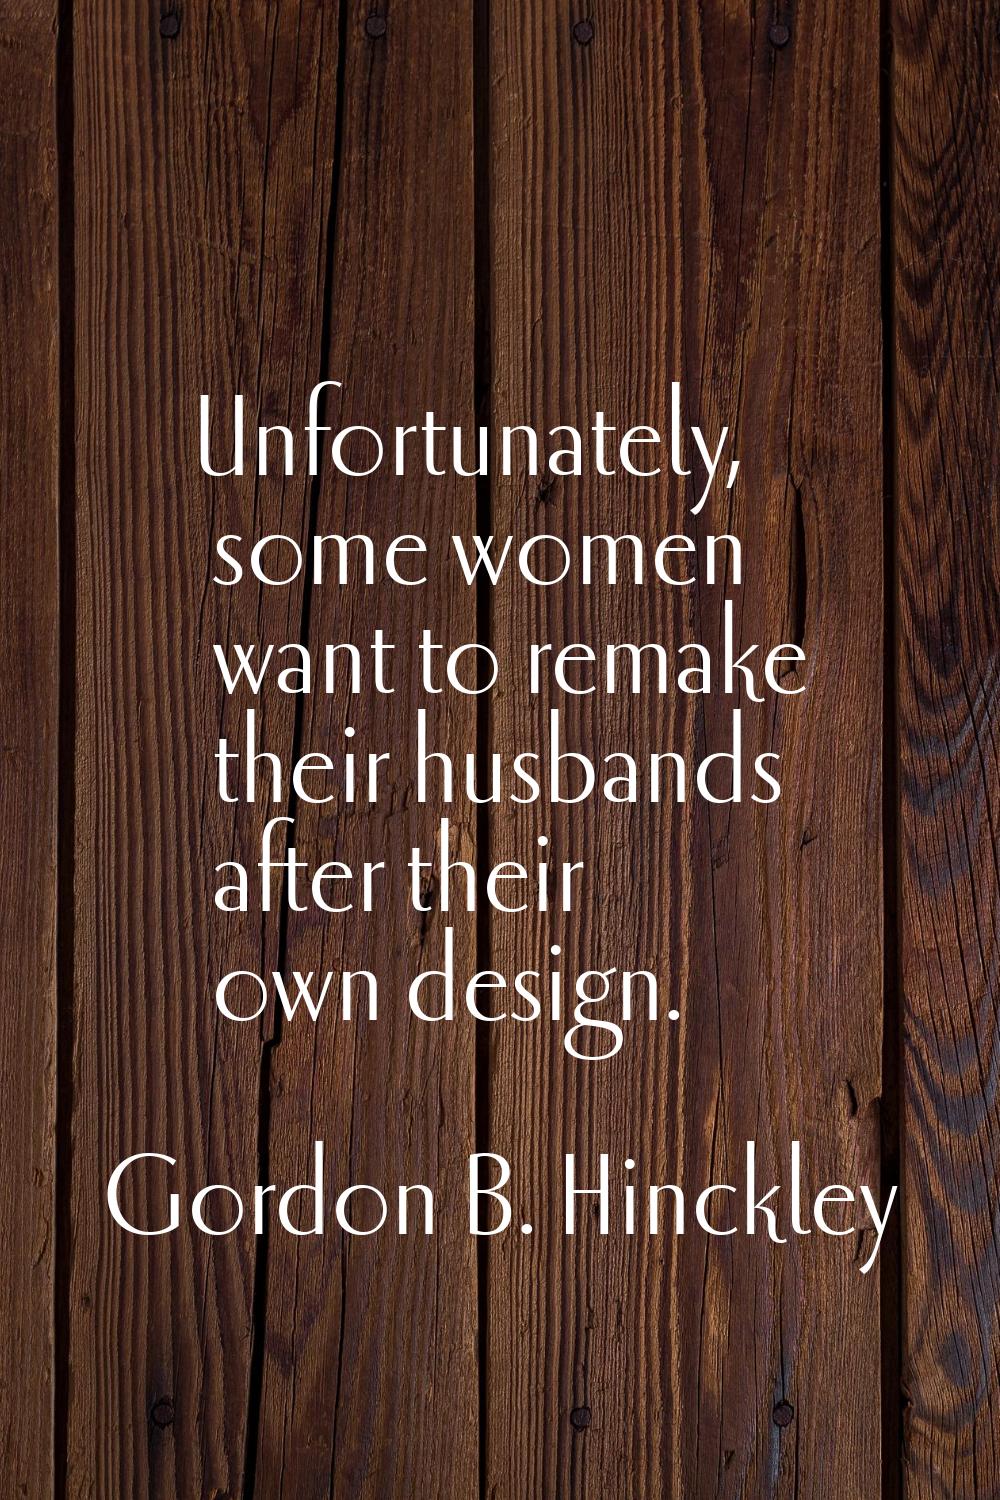 Unfortunately, some women want to remake their husbands after their own design.